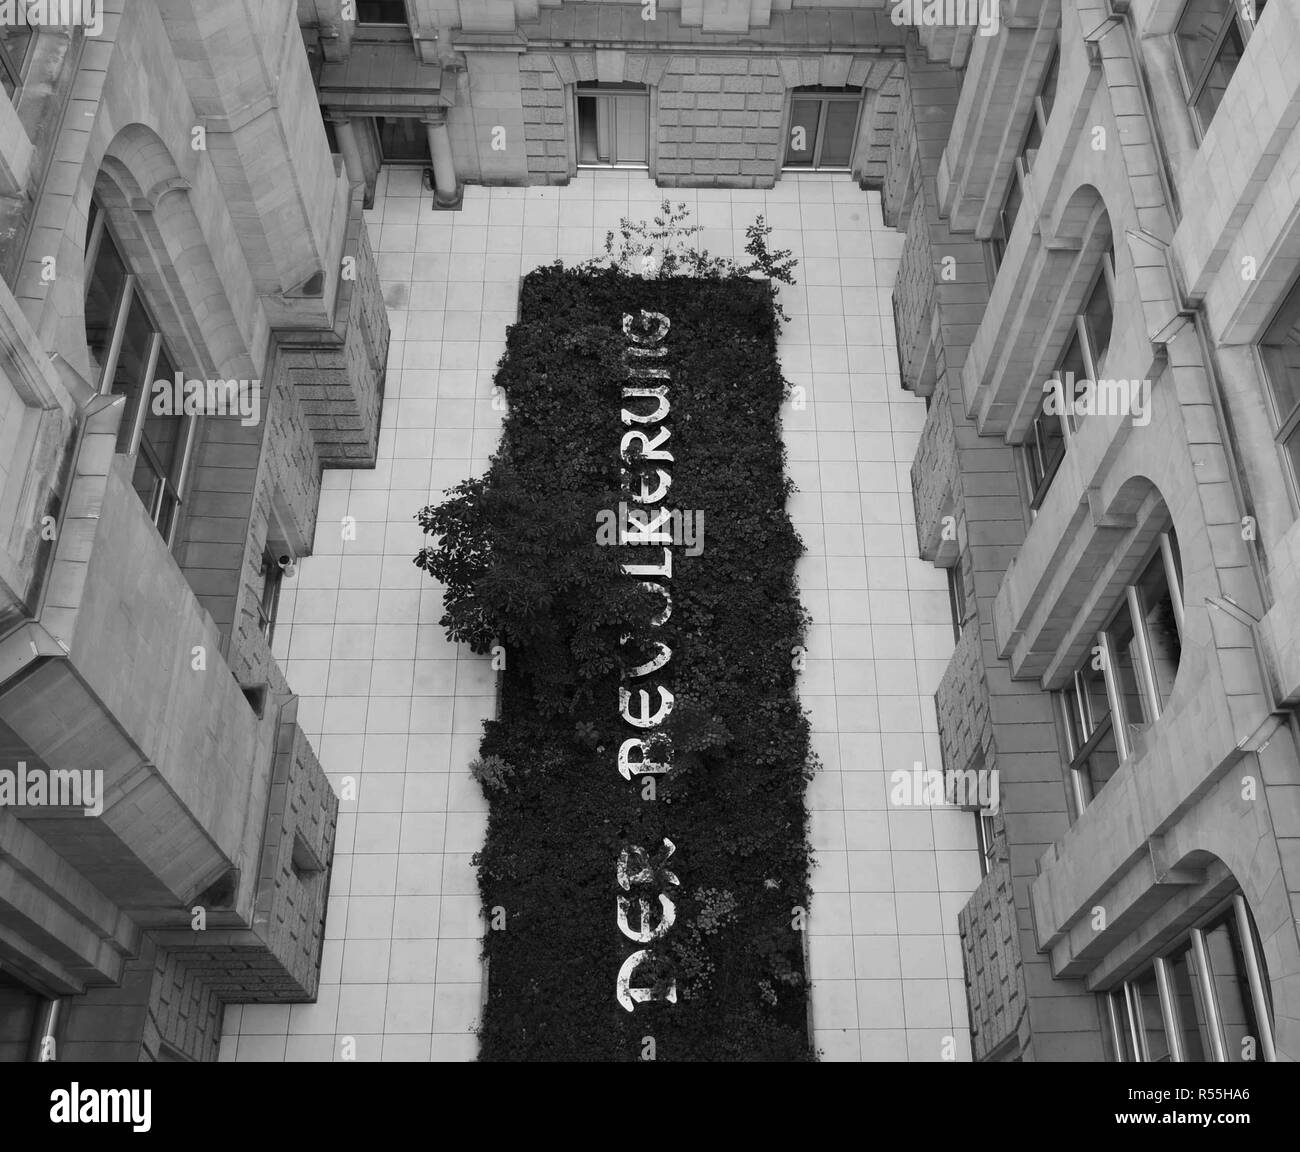 Looking down on Hans Haacke’s Der Bevölkerung art project in the open air courtyard of the Reichstag parliament building in Berlin, Germany Stock Photo